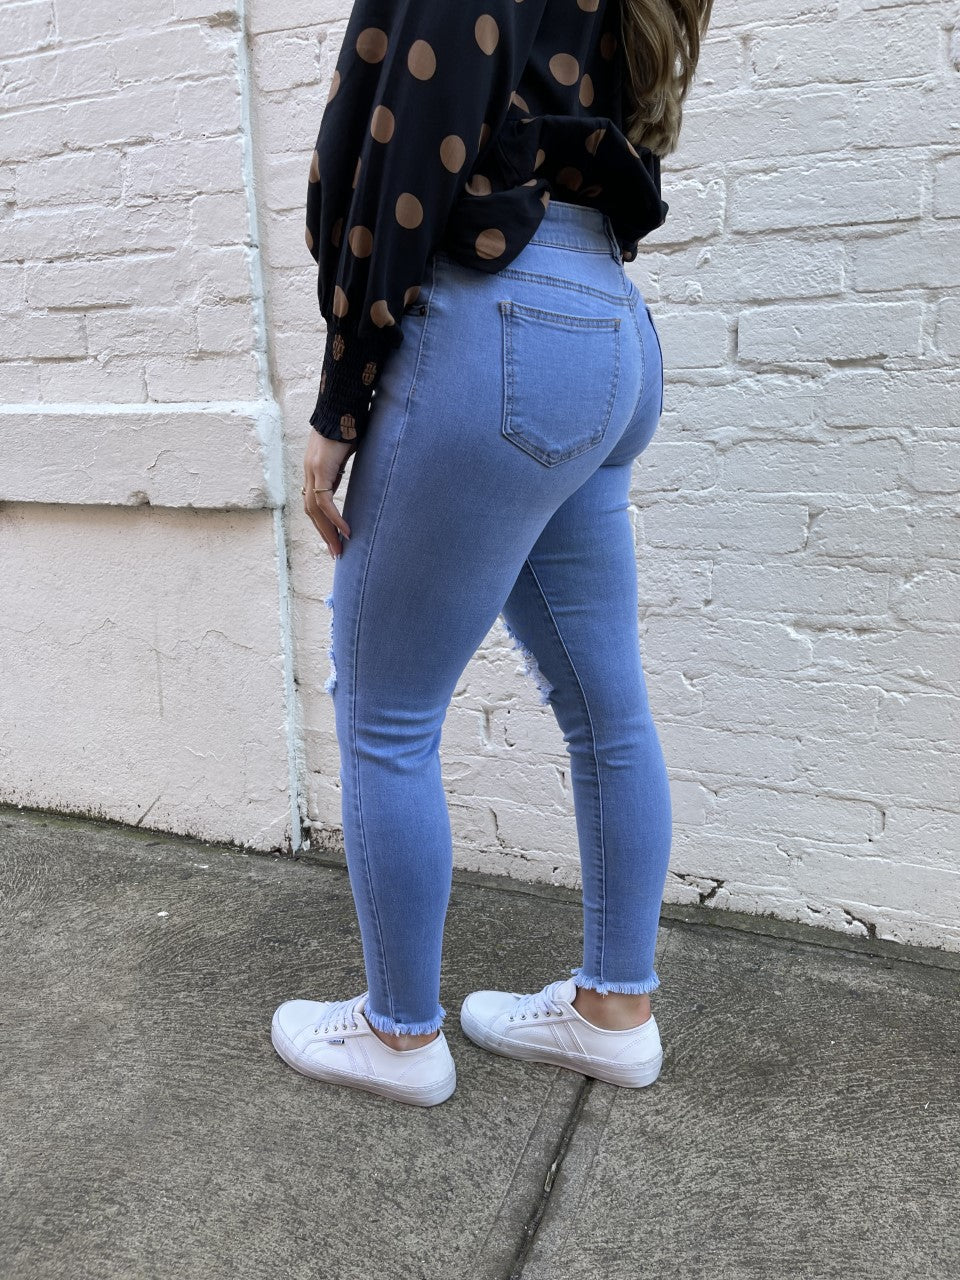 Satin Jeans - Ripped Blue Knees & Ankles